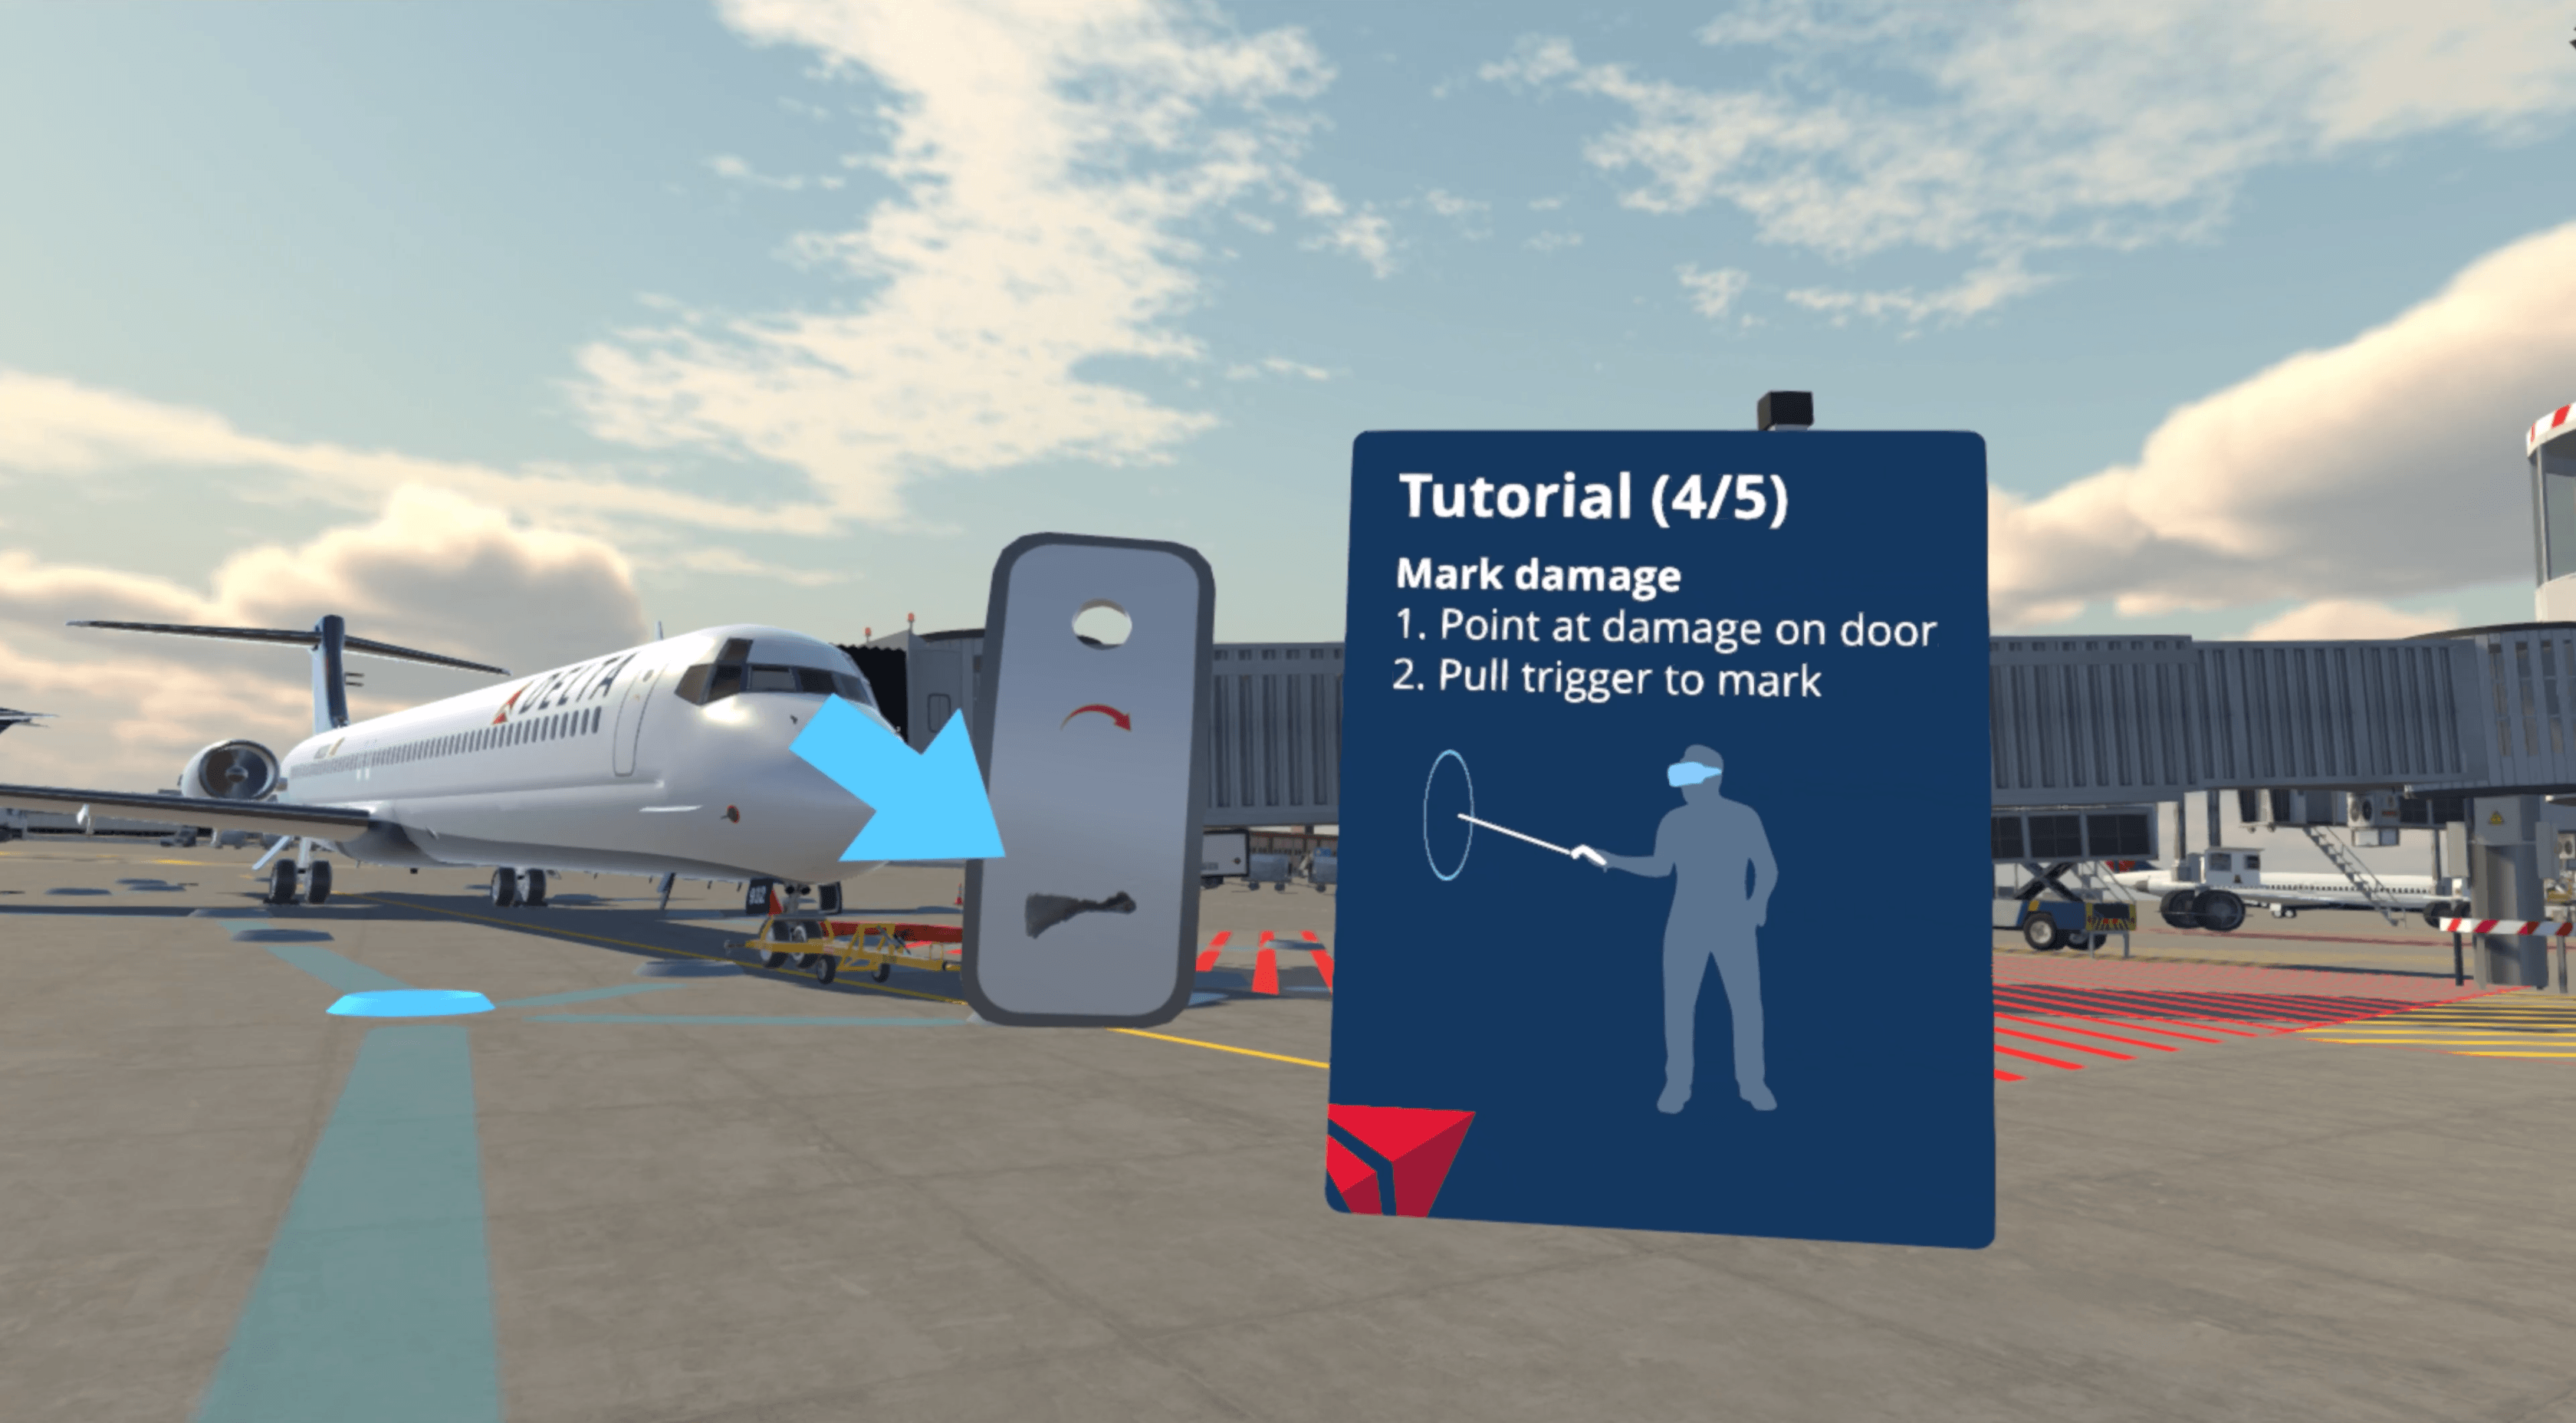 Delta Airlines' VR airfield training